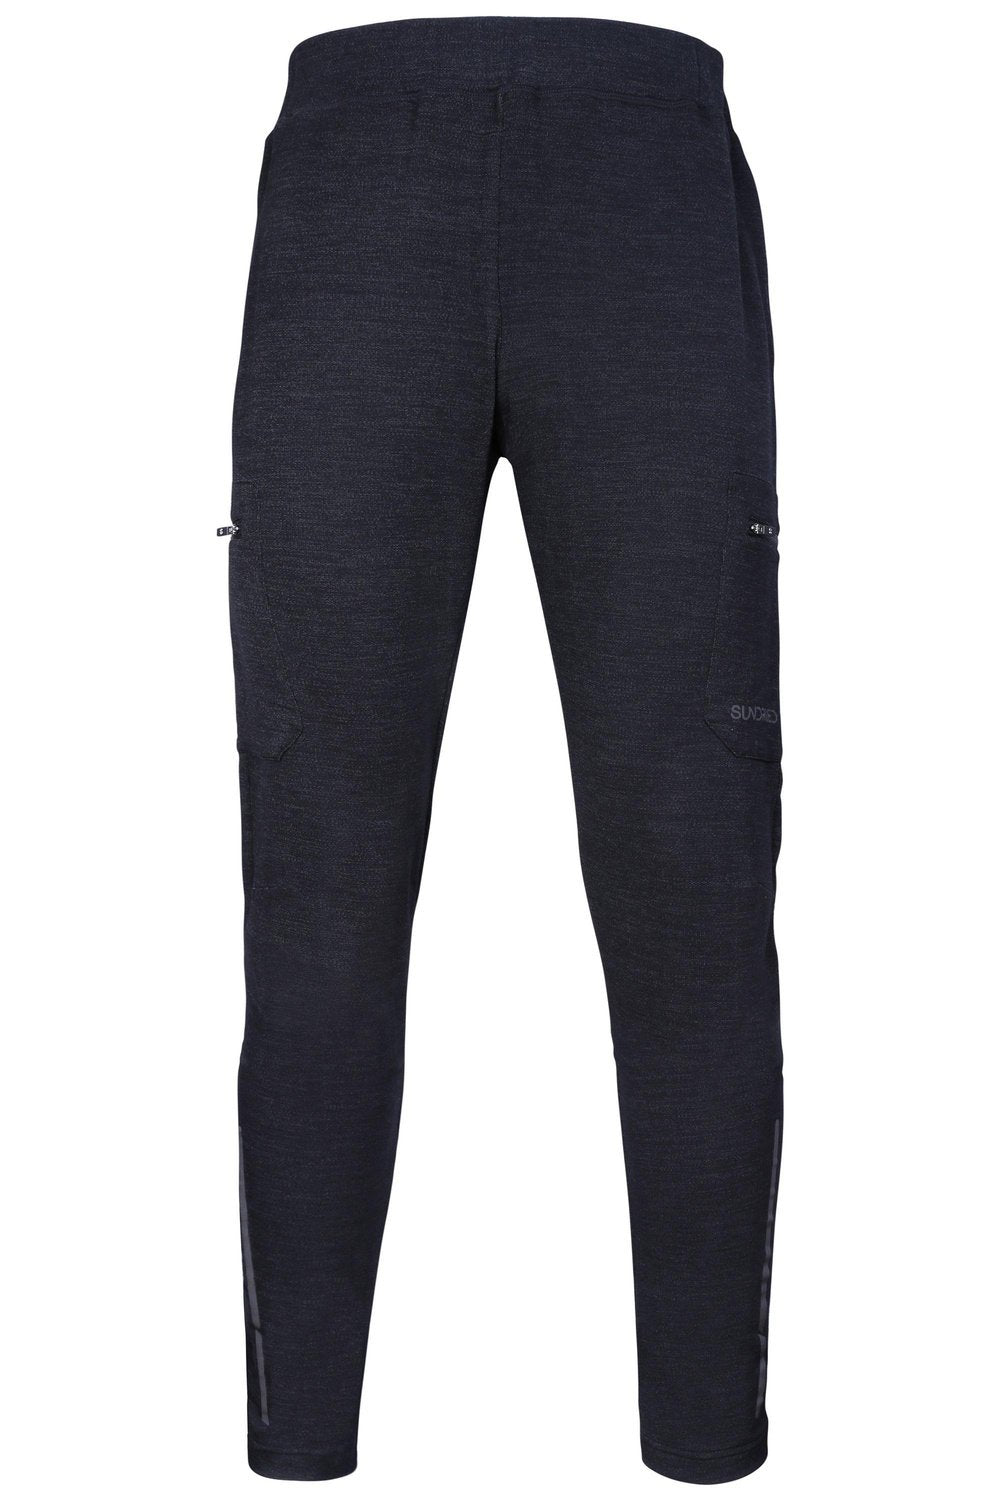 Sundried Ortler 2.0 Men's Slim-Fit Jogging Bottoms freeshipping - Sundried  Activewear